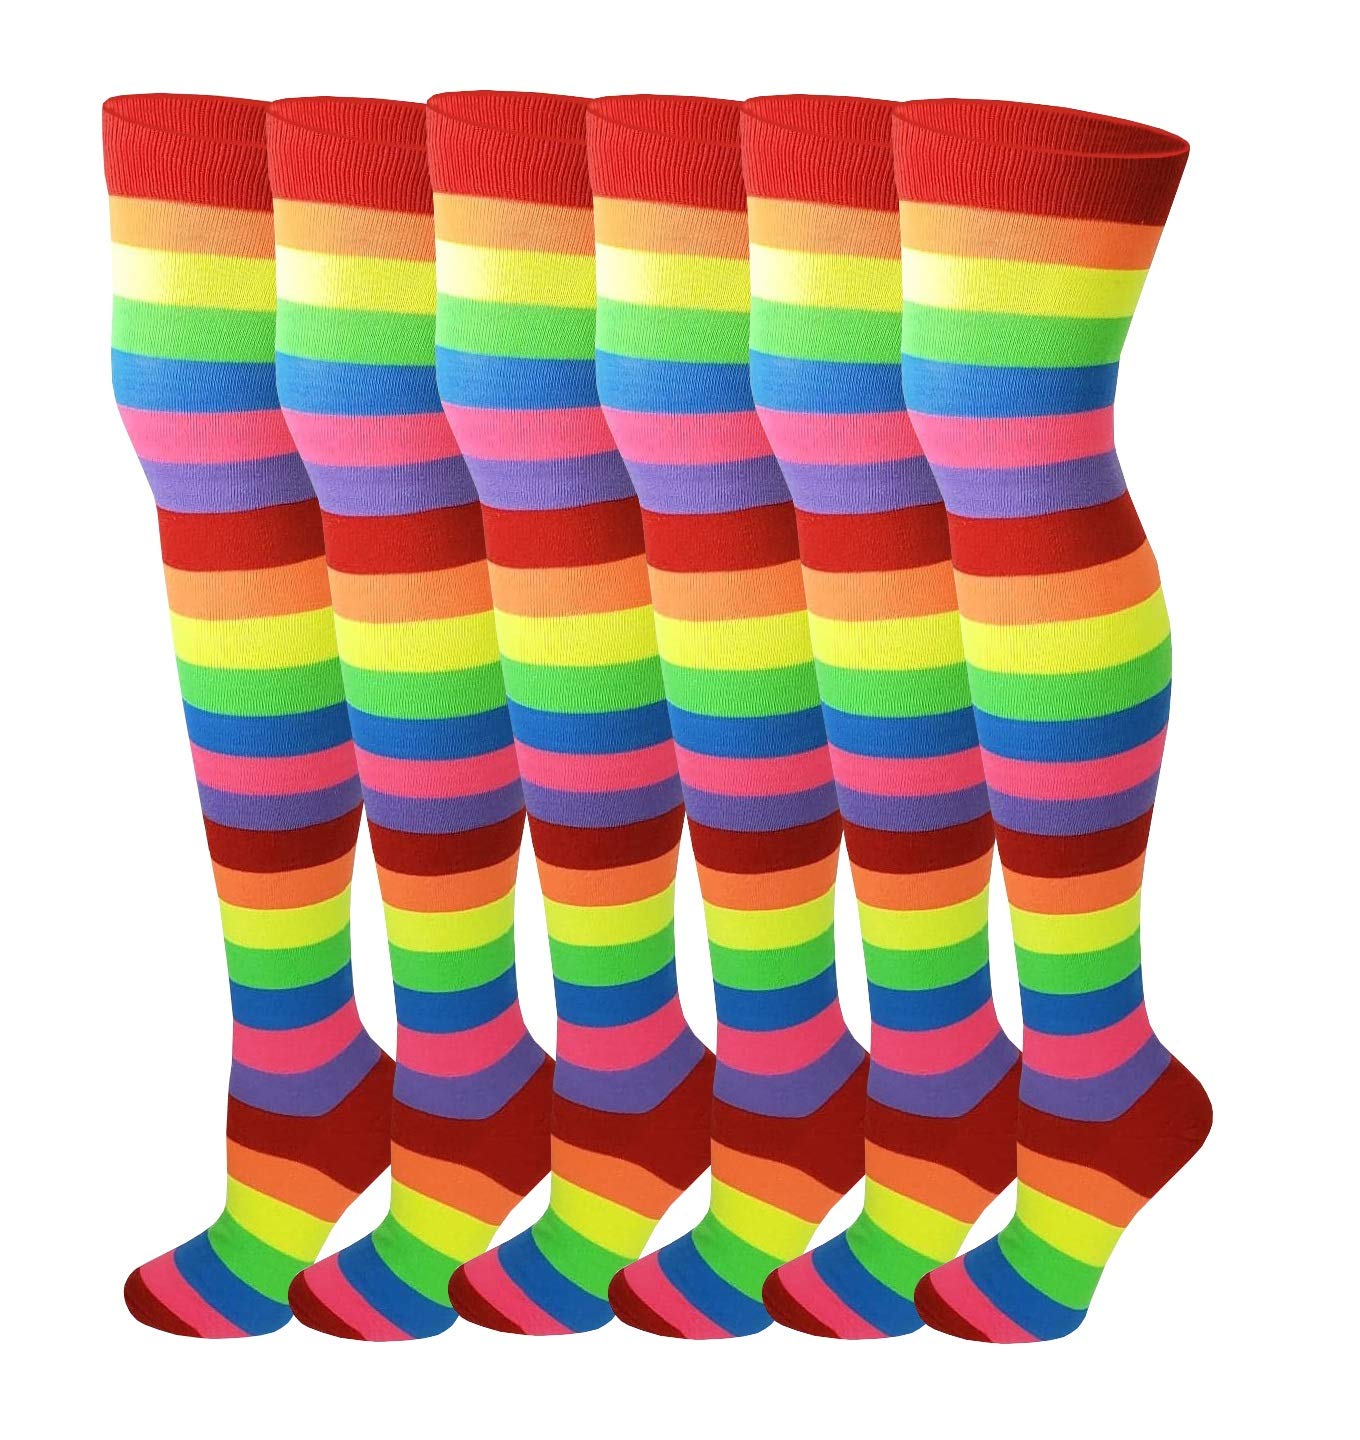 Thigh High Over the Knee Socks | Neon Rainbow Wide Stripes | Women (6 Pairs)